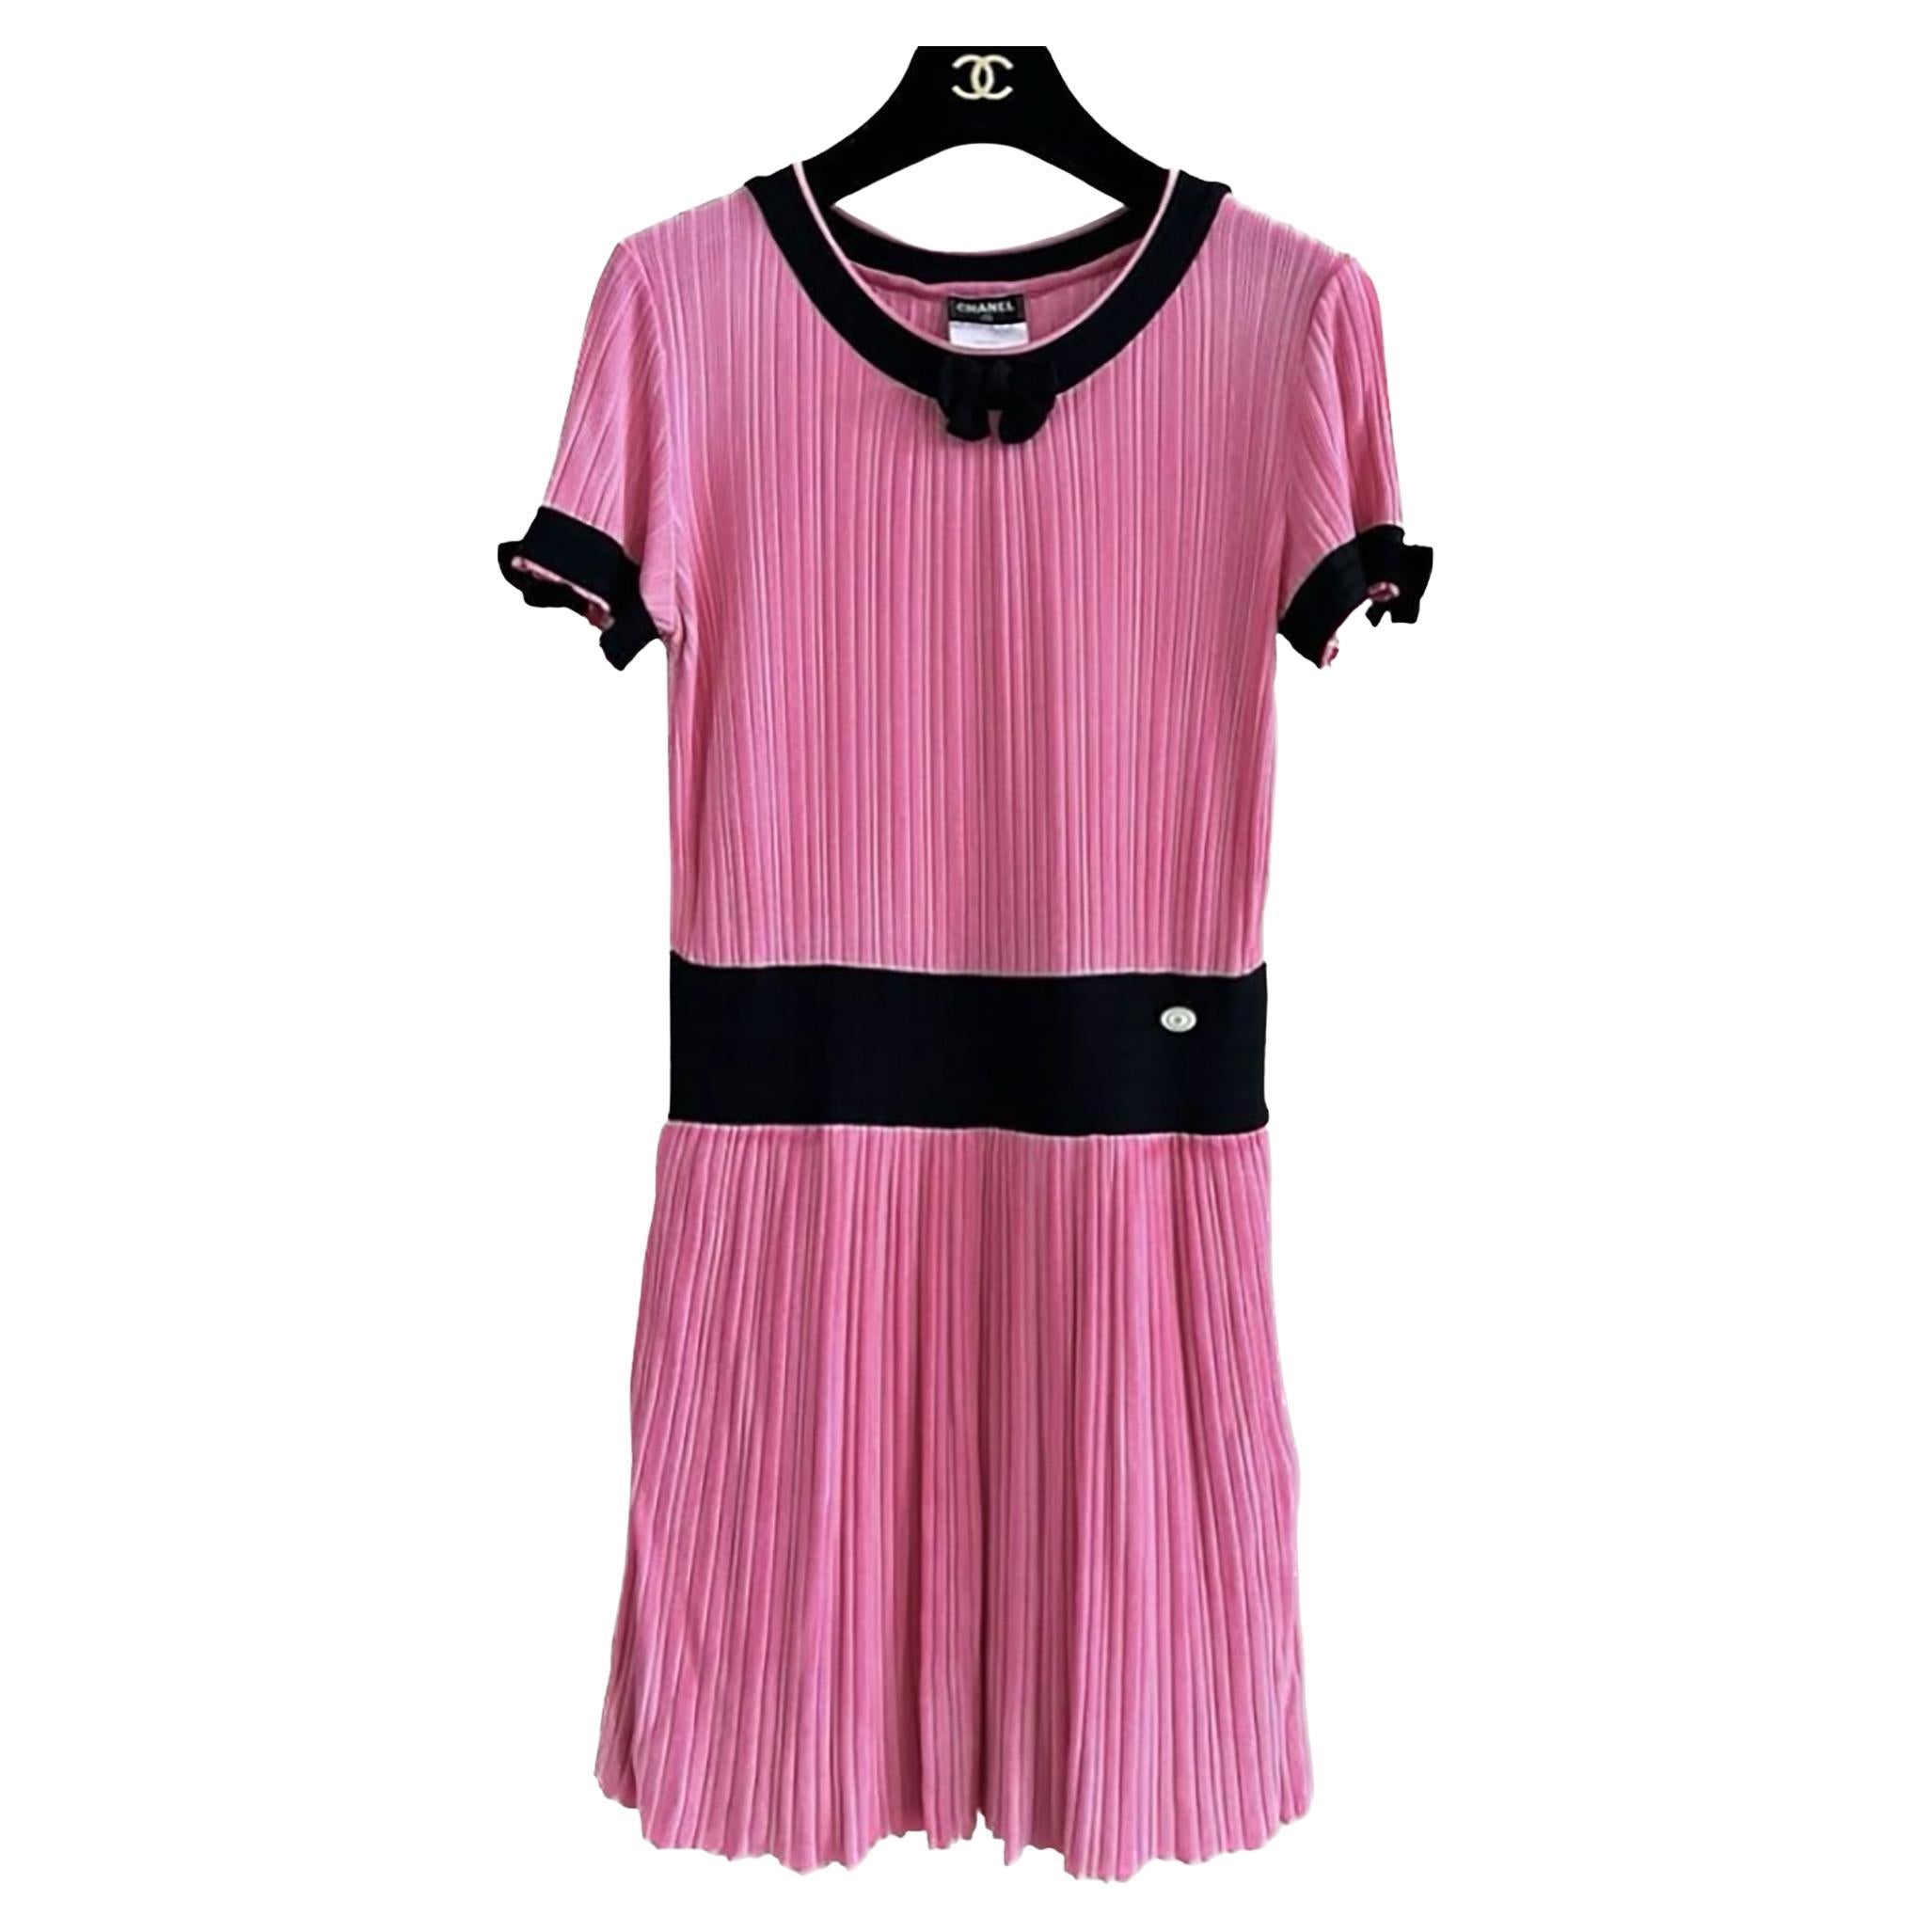 Emilio Pucci Sequin Dress - 15 For Sale on 1stDibs  emilio pucci blue  striped sequin tunic dress, emilio pucci blue sequin striped dress, emilio  pucci blue striped sequin tunic dress